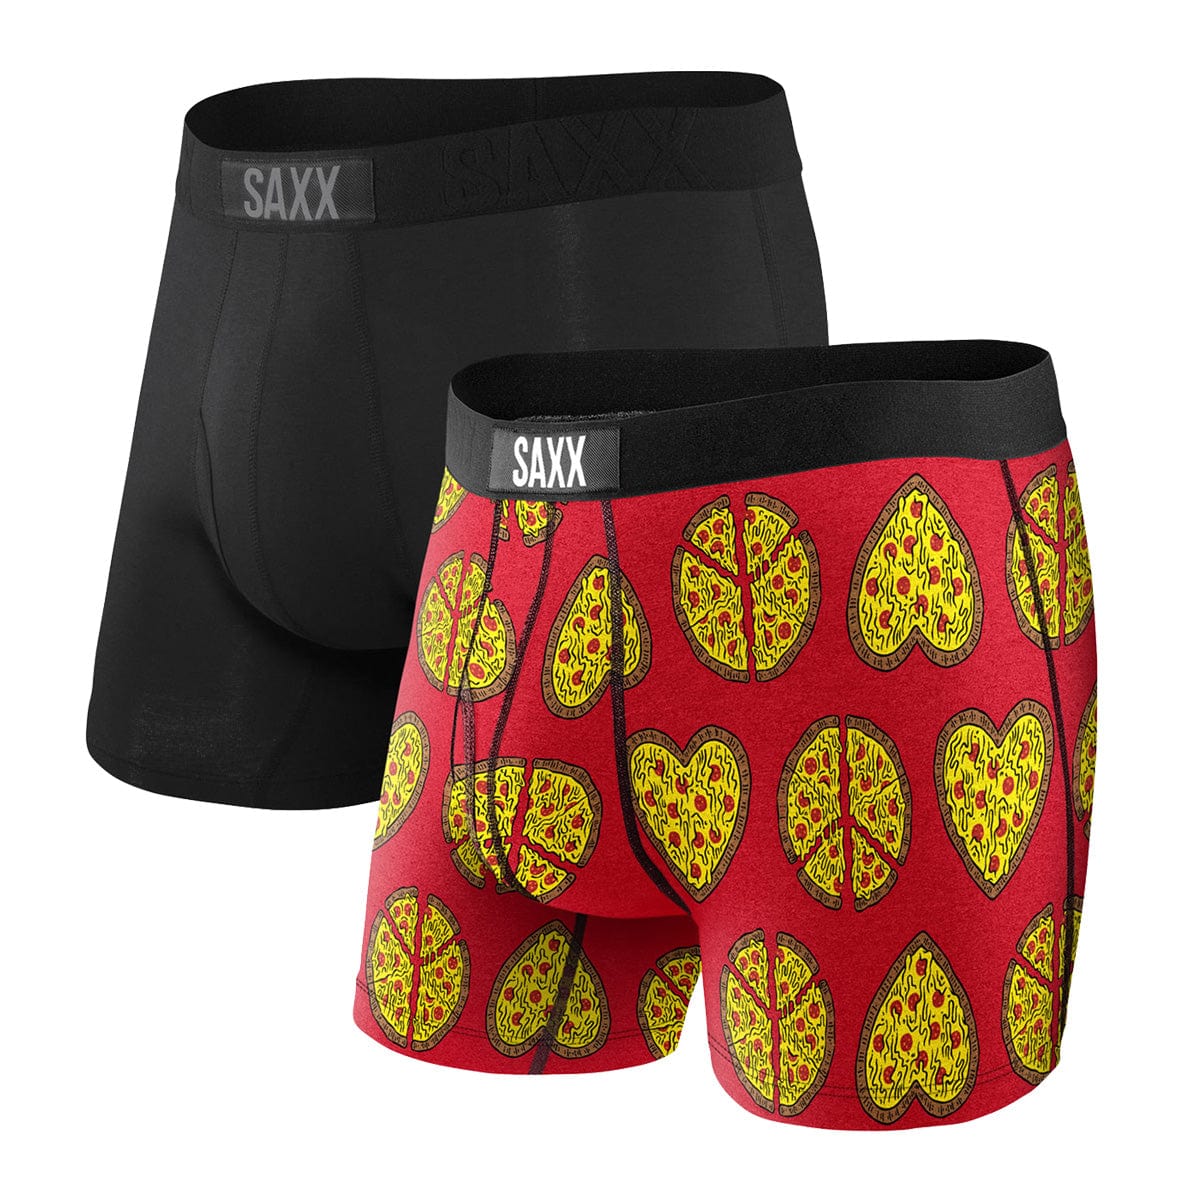 Saxx Ultra Boxers - Piece & Love / Black (2 Pack) - The Hockey Shop Source For Sports